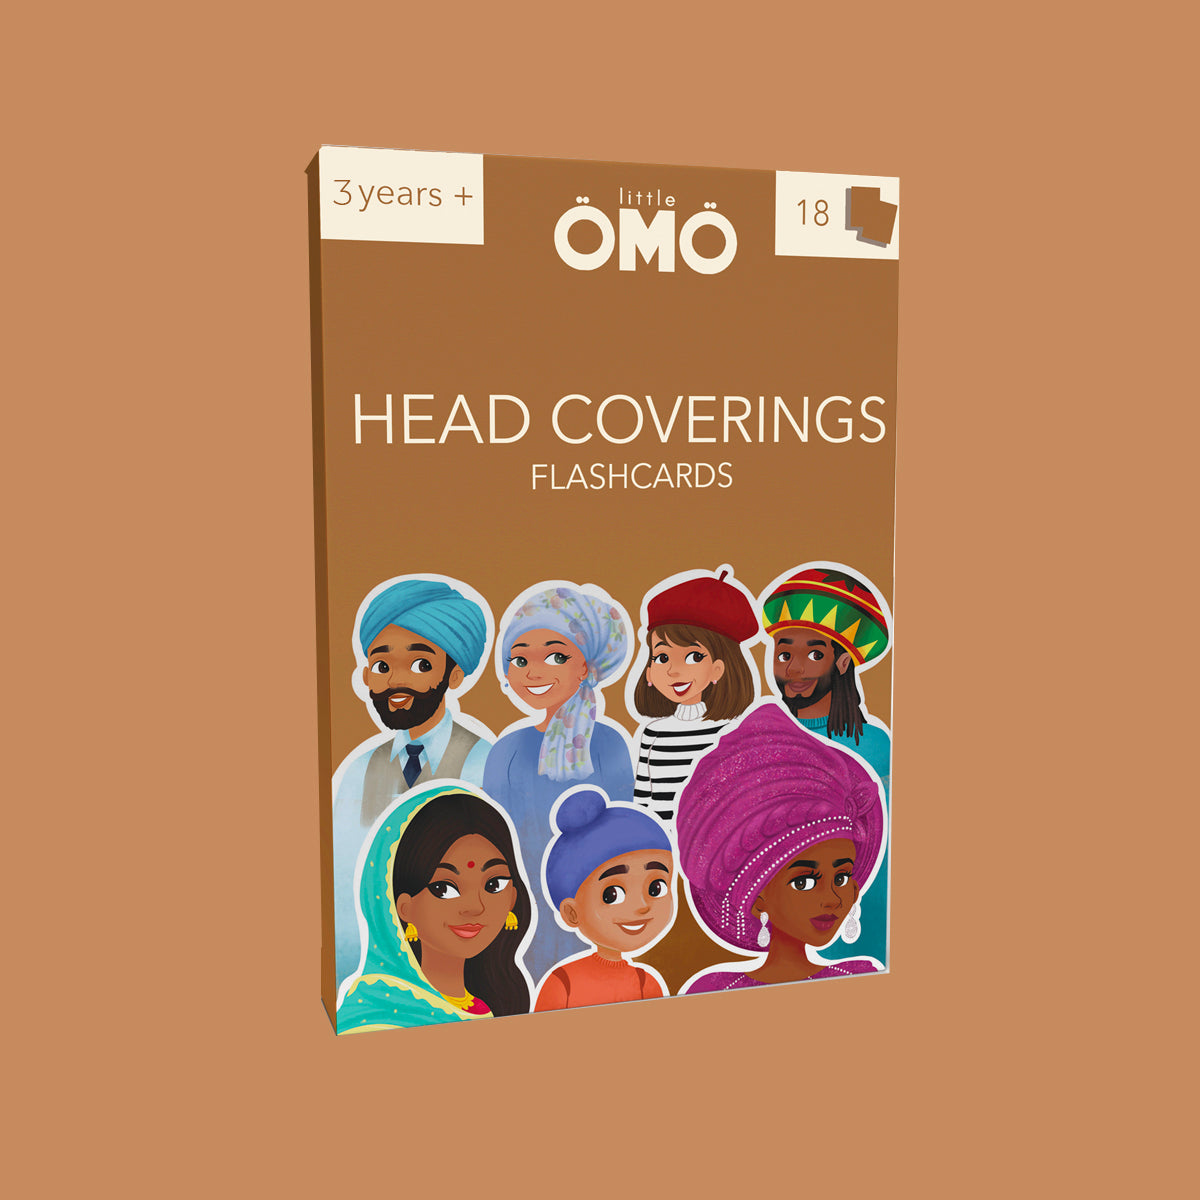 Head Coverings Flashcards